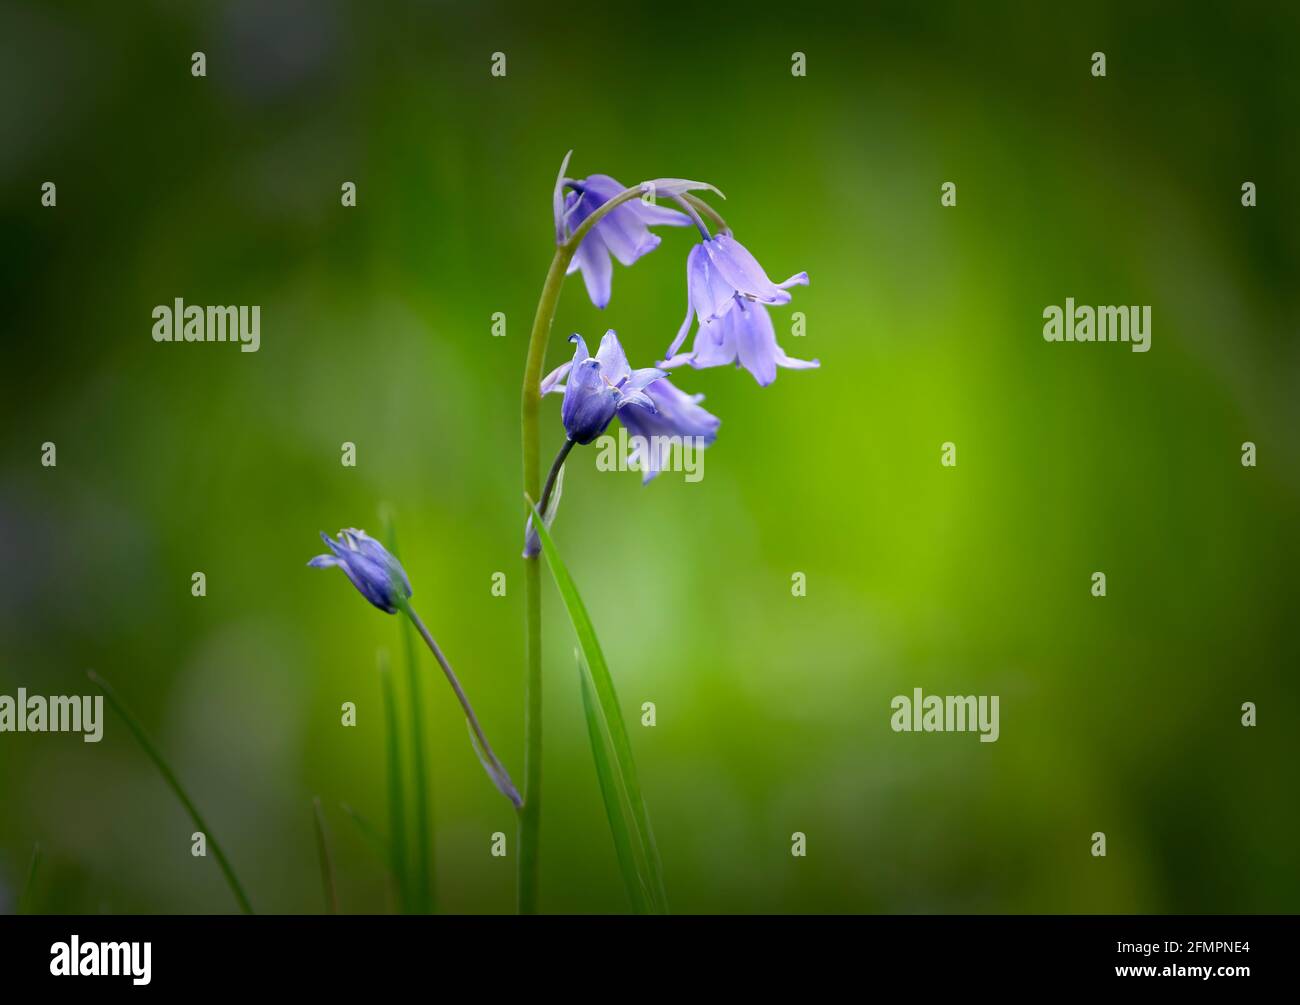 Solitary Bluebell flower against a blurred foliage background Stock Photo